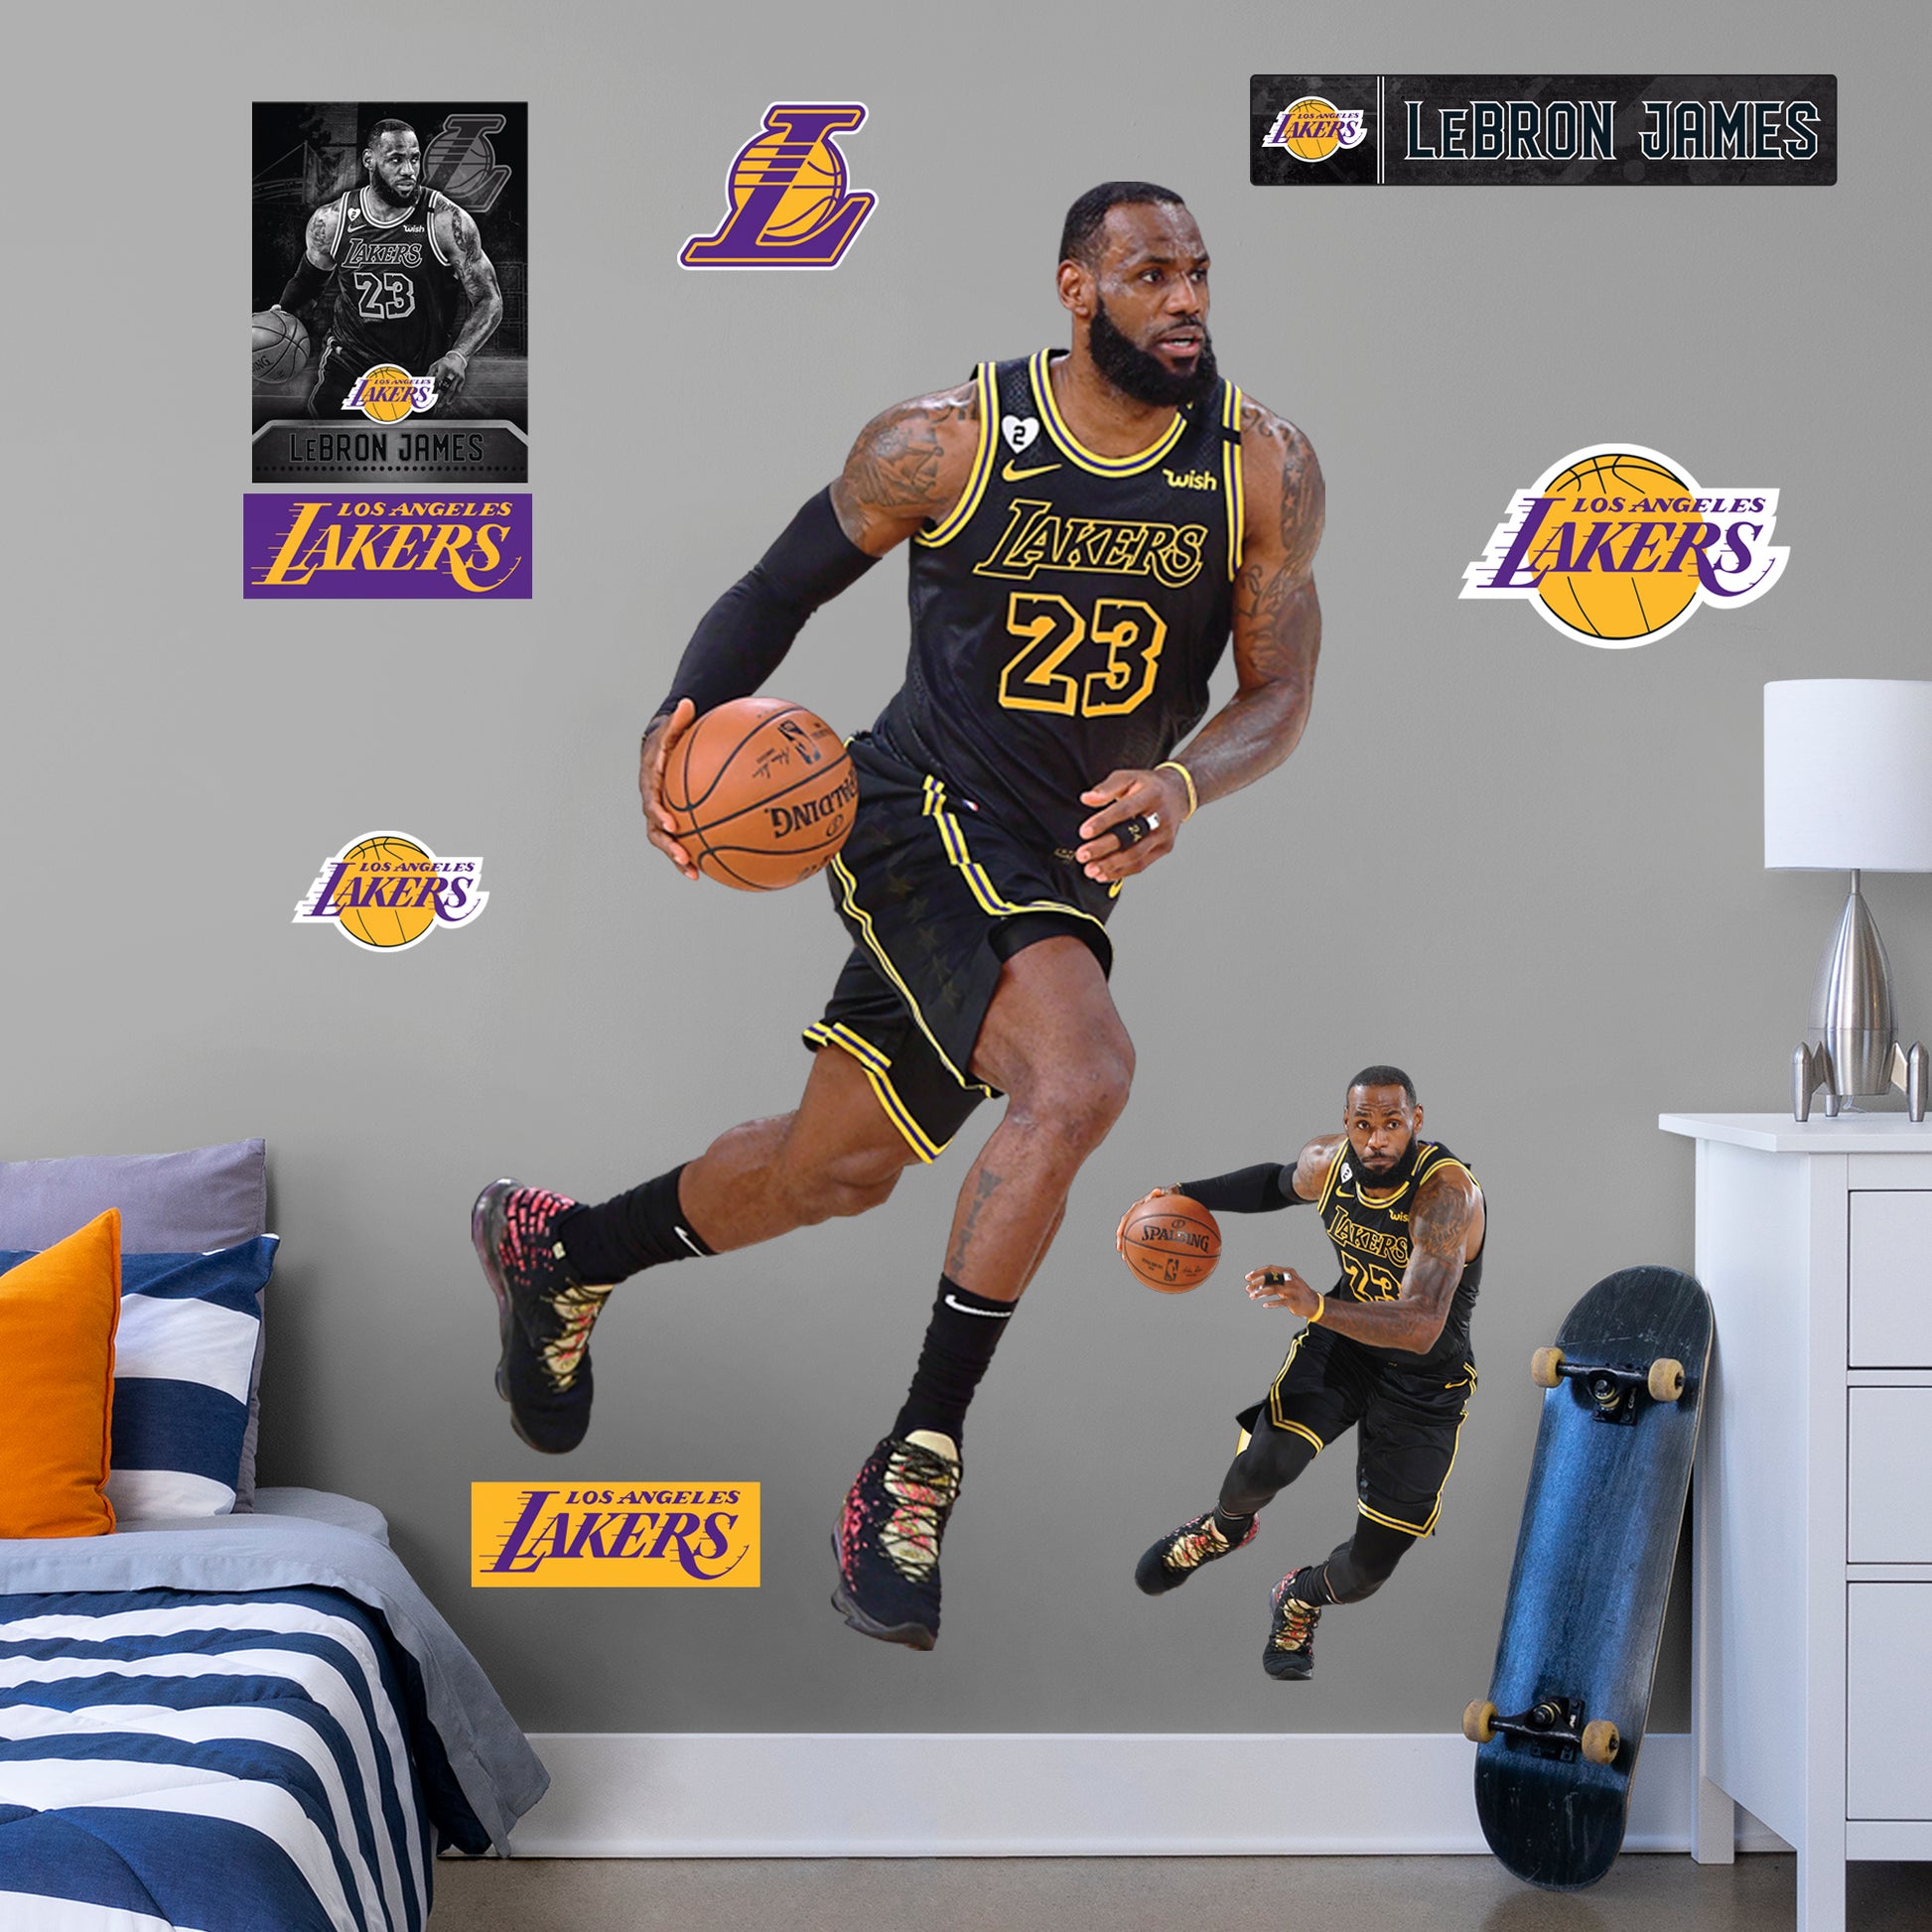 LeBron James: Black Jersey - Officially Licensed NBA Removable Wall De